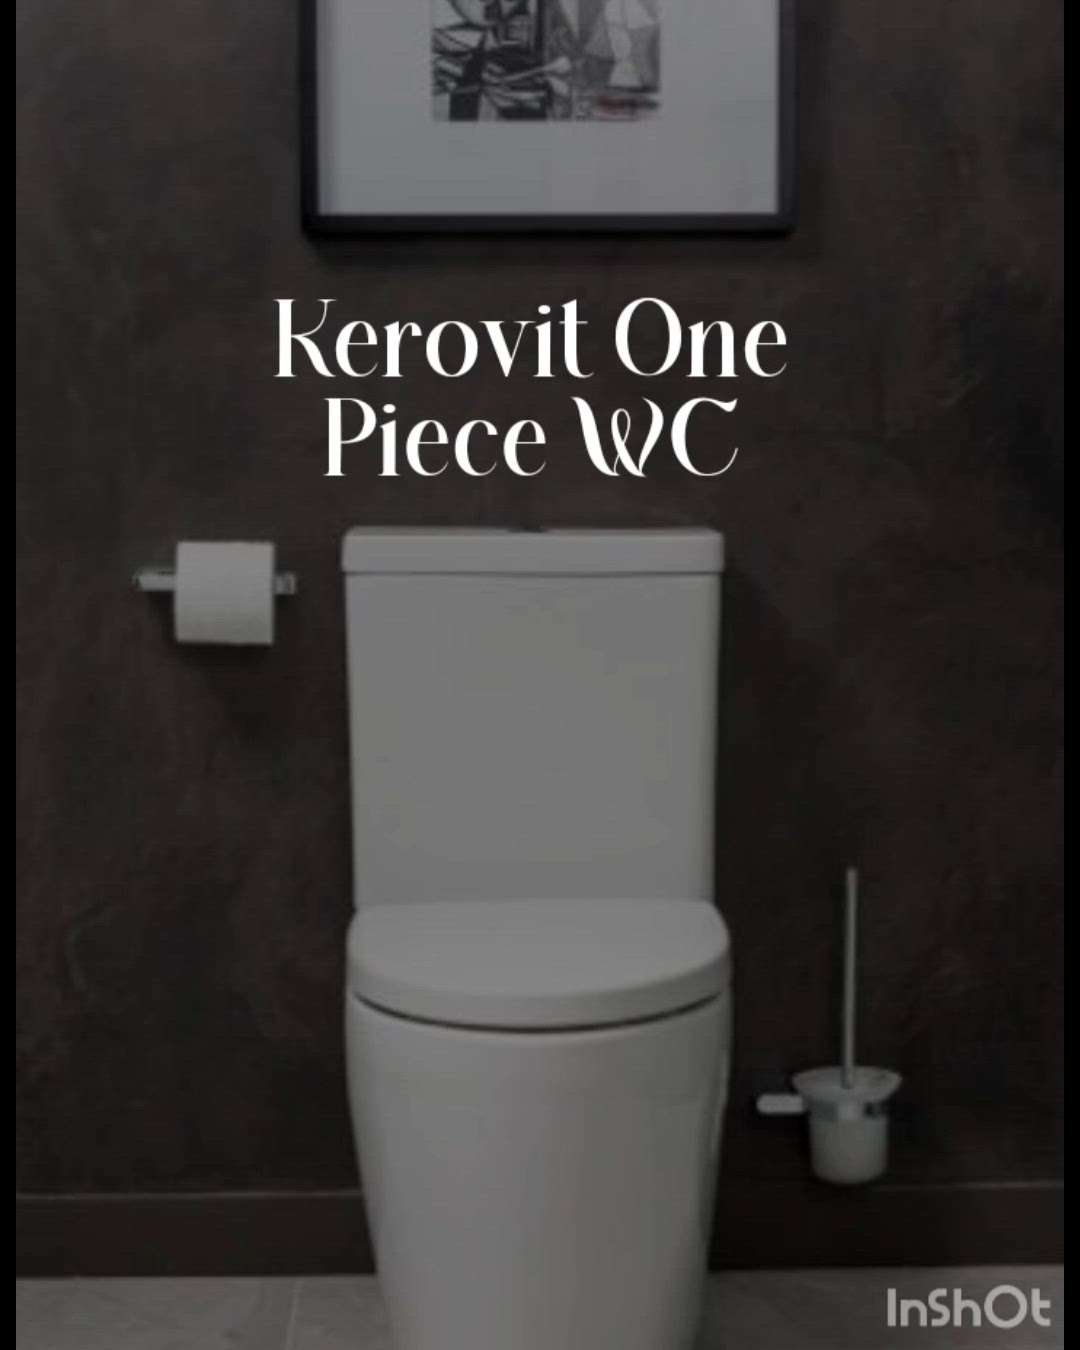 KEROVIT ONE PIECE WC
MATERIAL: CERAMIC
FINISH: GLOSSY
TYPE: FLOOR MOUNTED
SIPHONIC ONE PIECE TOILET WITH P-TRAP, PP SOFT CLOSE SEAT COVER, SCRATCH & BACTERIA RESISTANT, MAXIMUM WATER SAVING IS AN ATTRACTIVE FEATURE.

#kerovit #onepiececloset #wc #besttoilet #sanitaryshopping #koloapp  #kolobestprice #Sanitaryware #bestbrand #ceramic #white